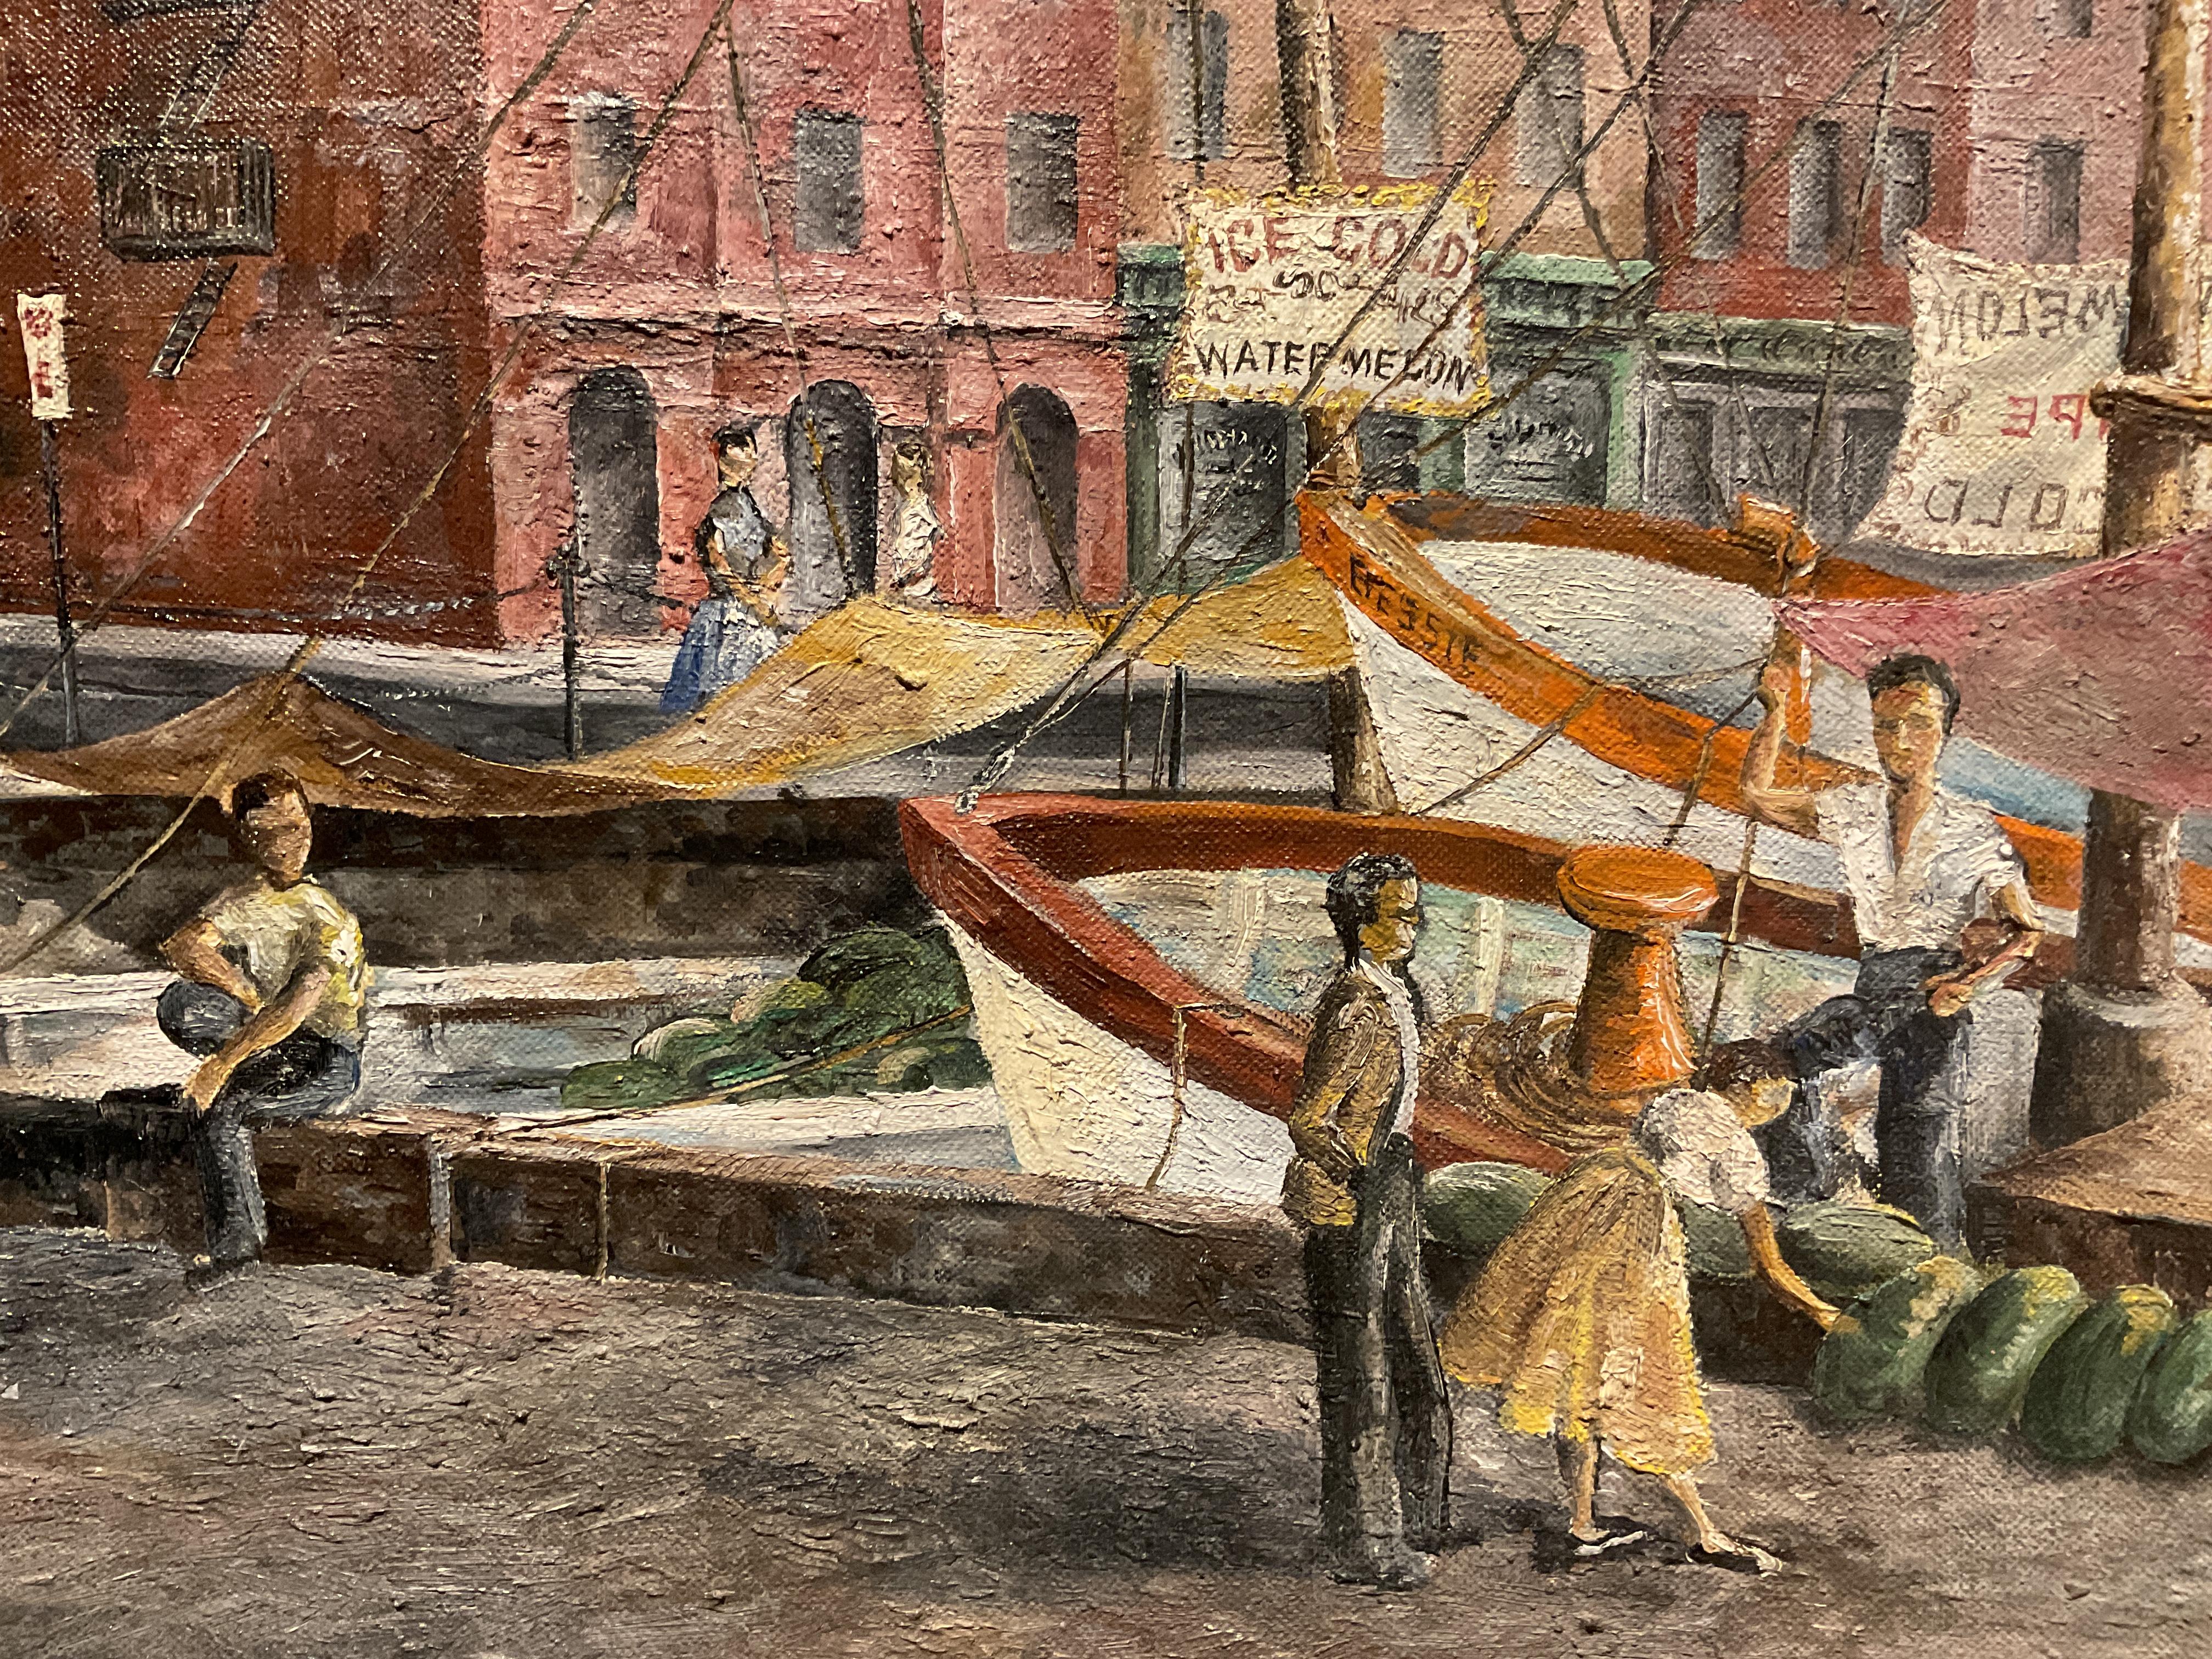 This lively oil painting depicts Baltimore’s busy waterfront, specifically the former piers that lined Pratt Street in the Inner Harbor. Painted by local artist Rosalie Mills ( née Hamblin), the scene depicts the watermelon boats that berthed near